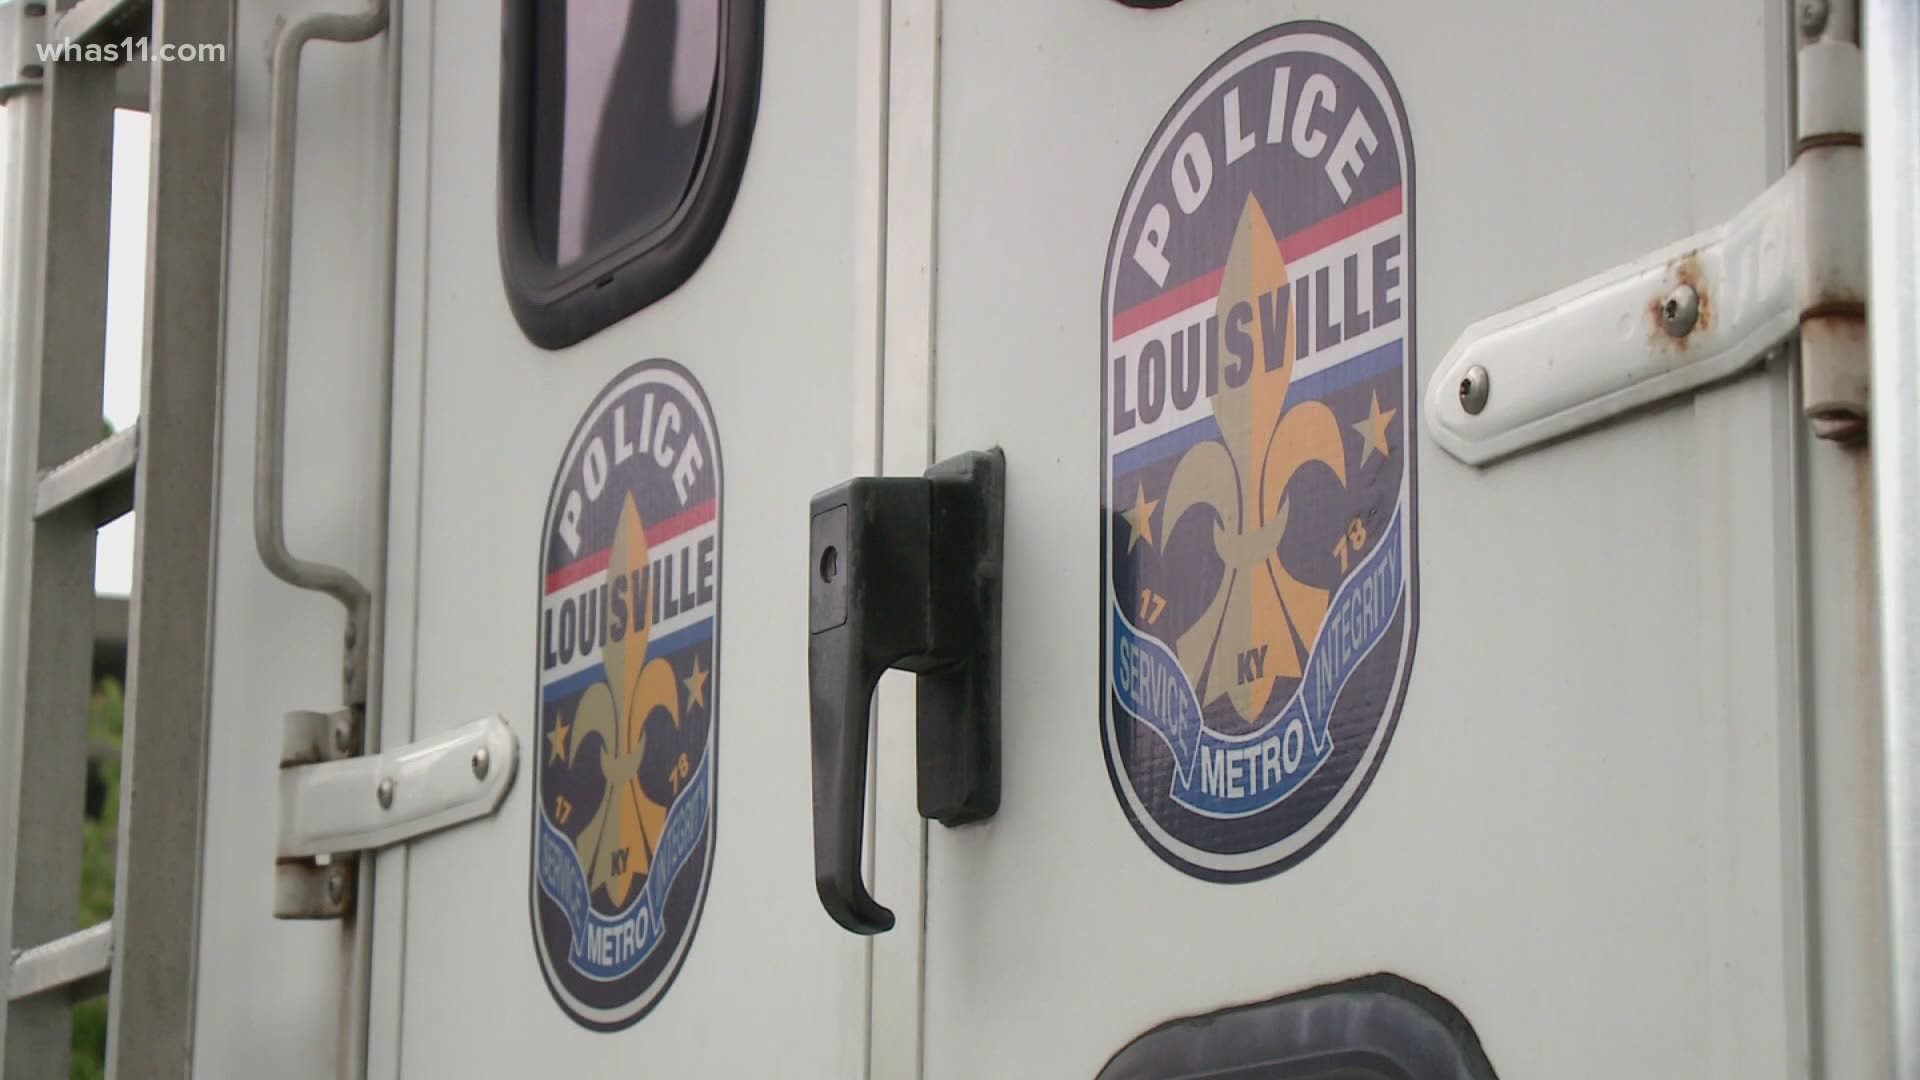 Louisville's Fraternal Order of Police and Breonna Taylor's attorneys share what their hopes are moving forward.